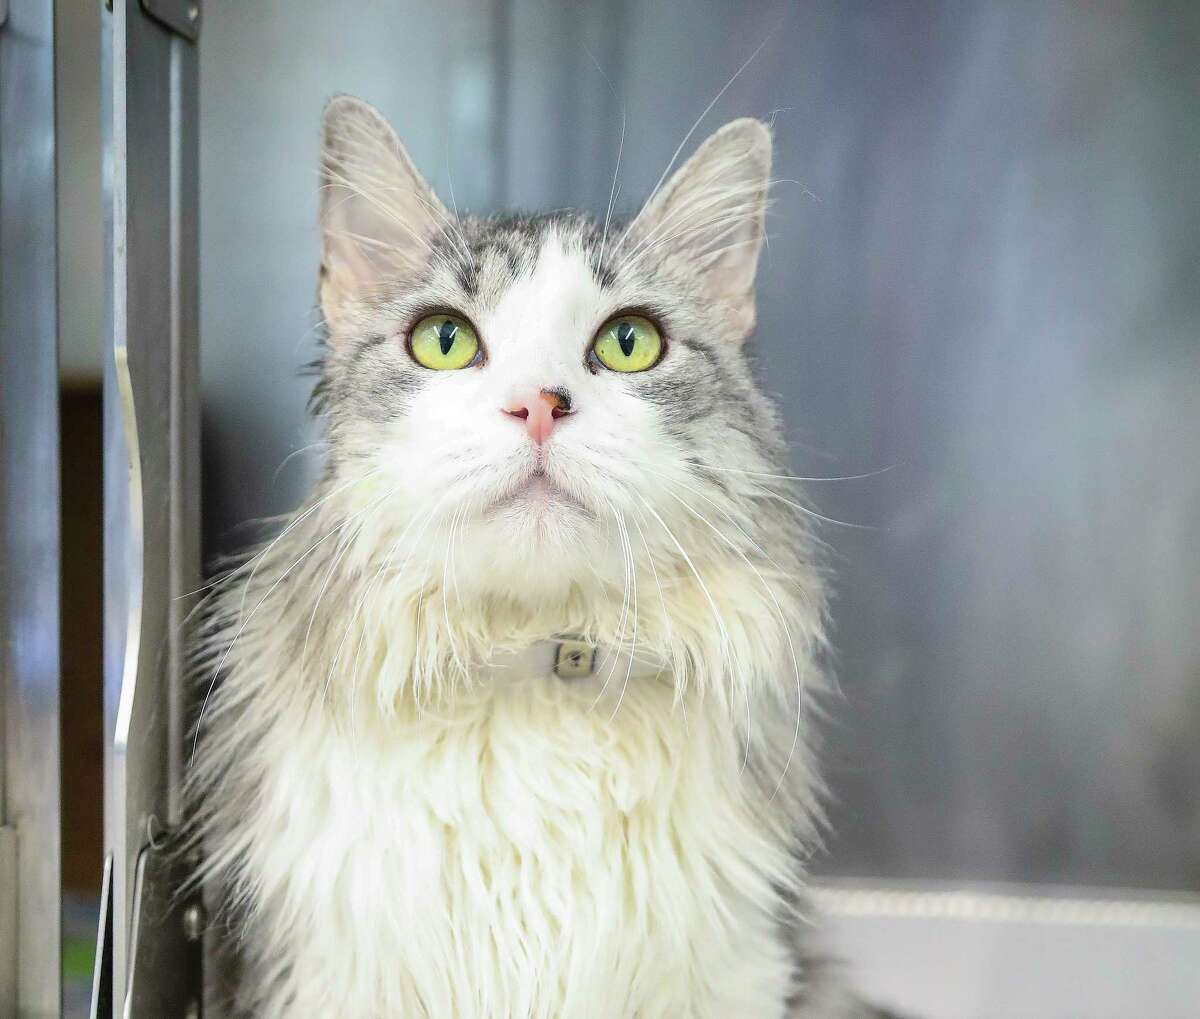 French Onion (A1784643) is a male, 6-year-old Silver Tabby medium hair cat available for adoption from BARC Animal Shelter on Tuesday, May 3, 2022 in Houston. Volunteers say that French Onion “is so handsome and so sweet. He loves being scratched on the top of his fluffy head” and he is one of 126 cats total held since September 15, 2021, on a cruelty hold pending the outcome of the court proceedings. 